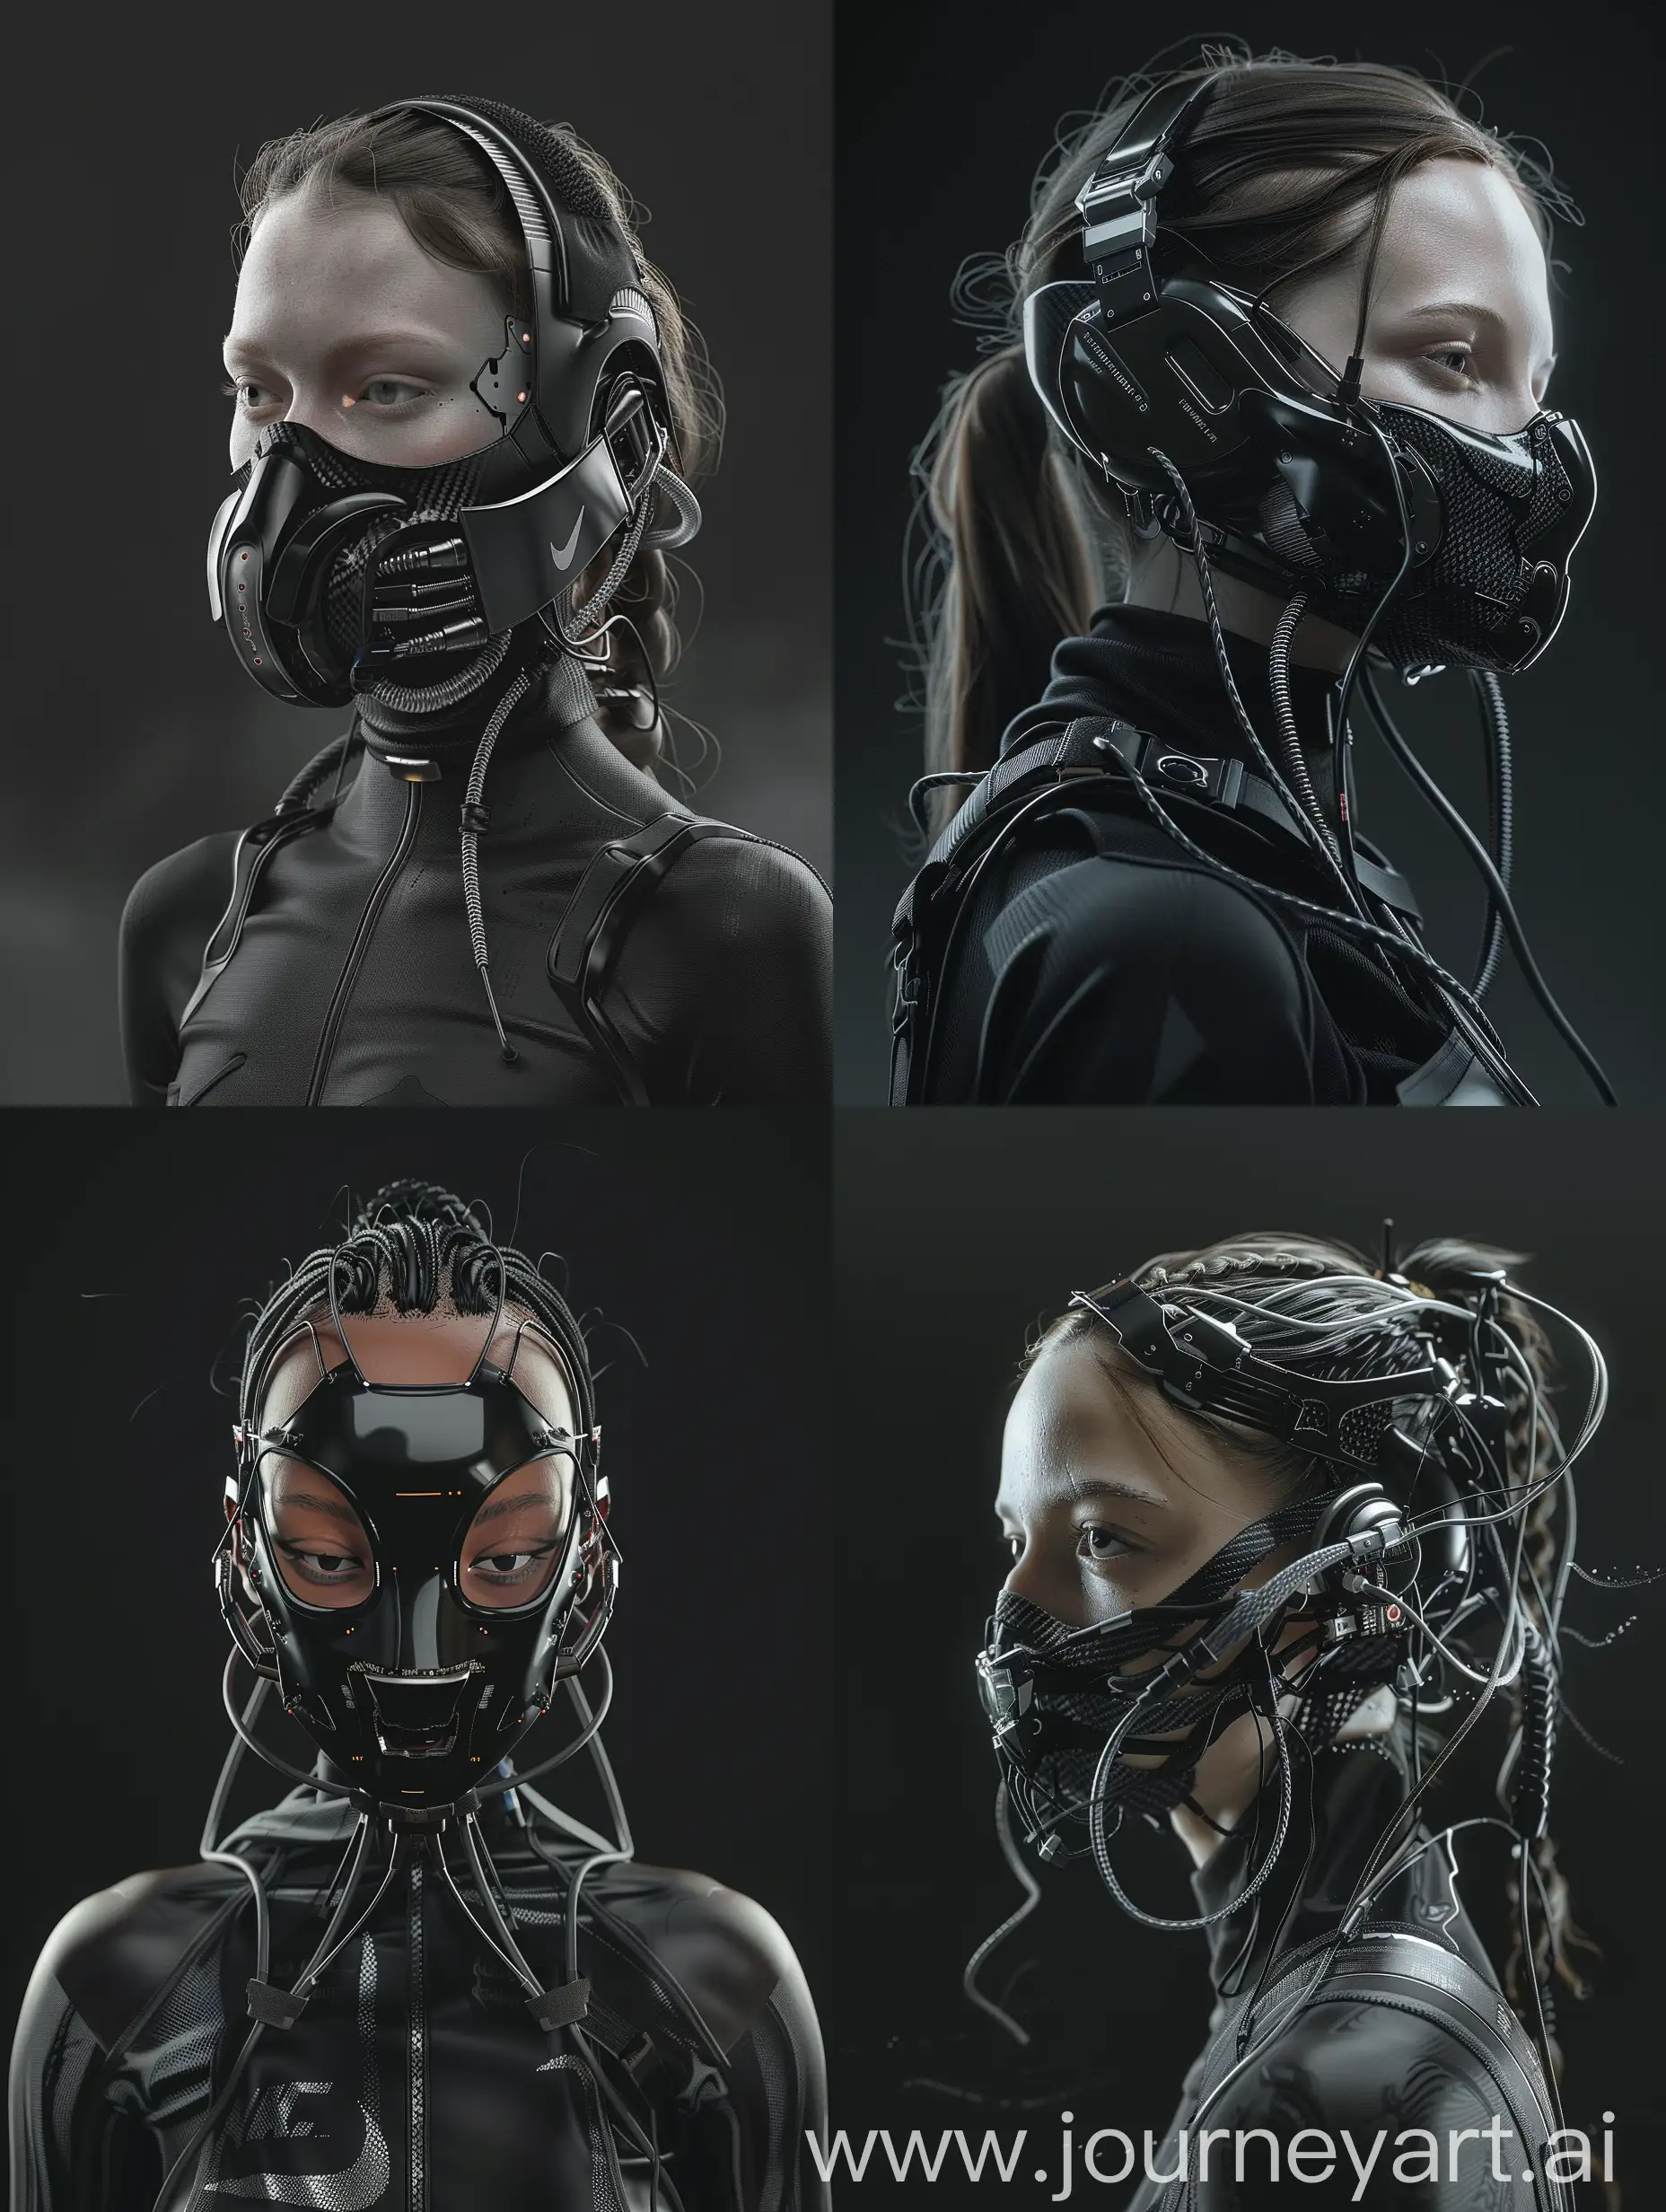 Futuristic-Cyberpunk-Character-with-Nikeinspired-Addons-on-Sleek-Black-Background